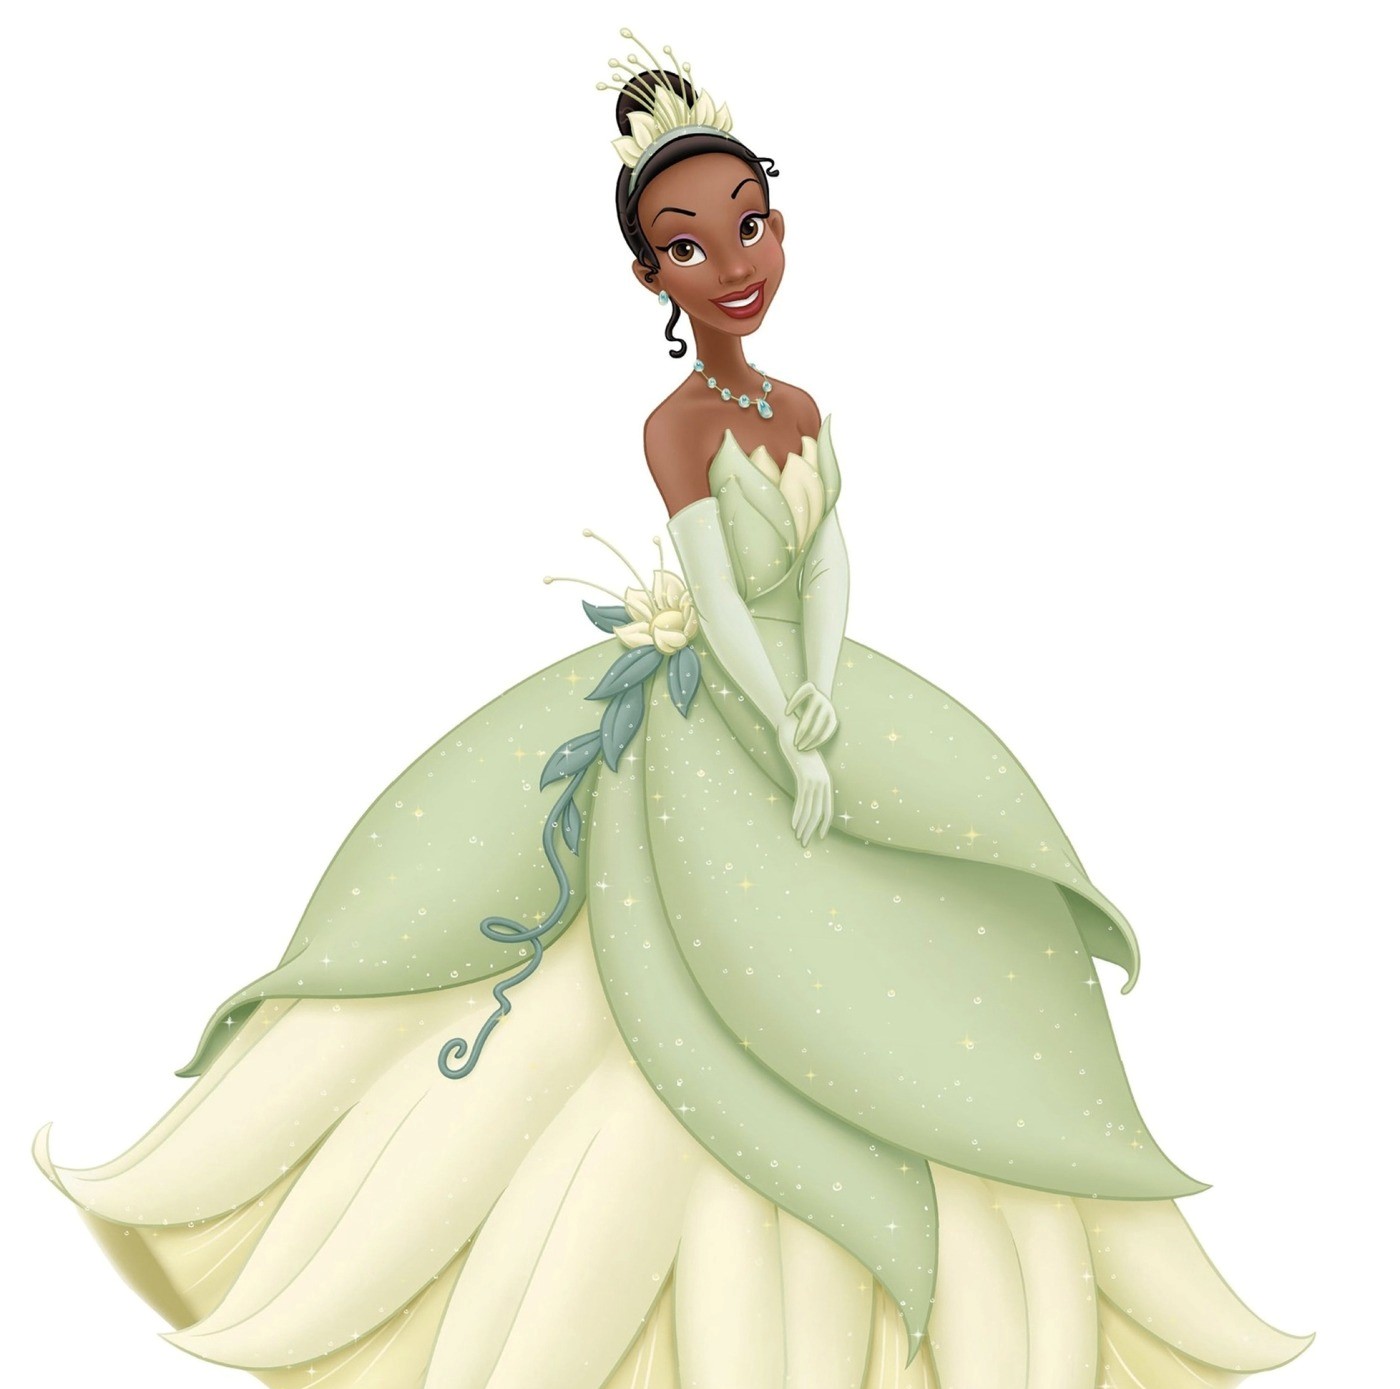 10 Things You Never Knew About Disney's 'The Princess and the Frog